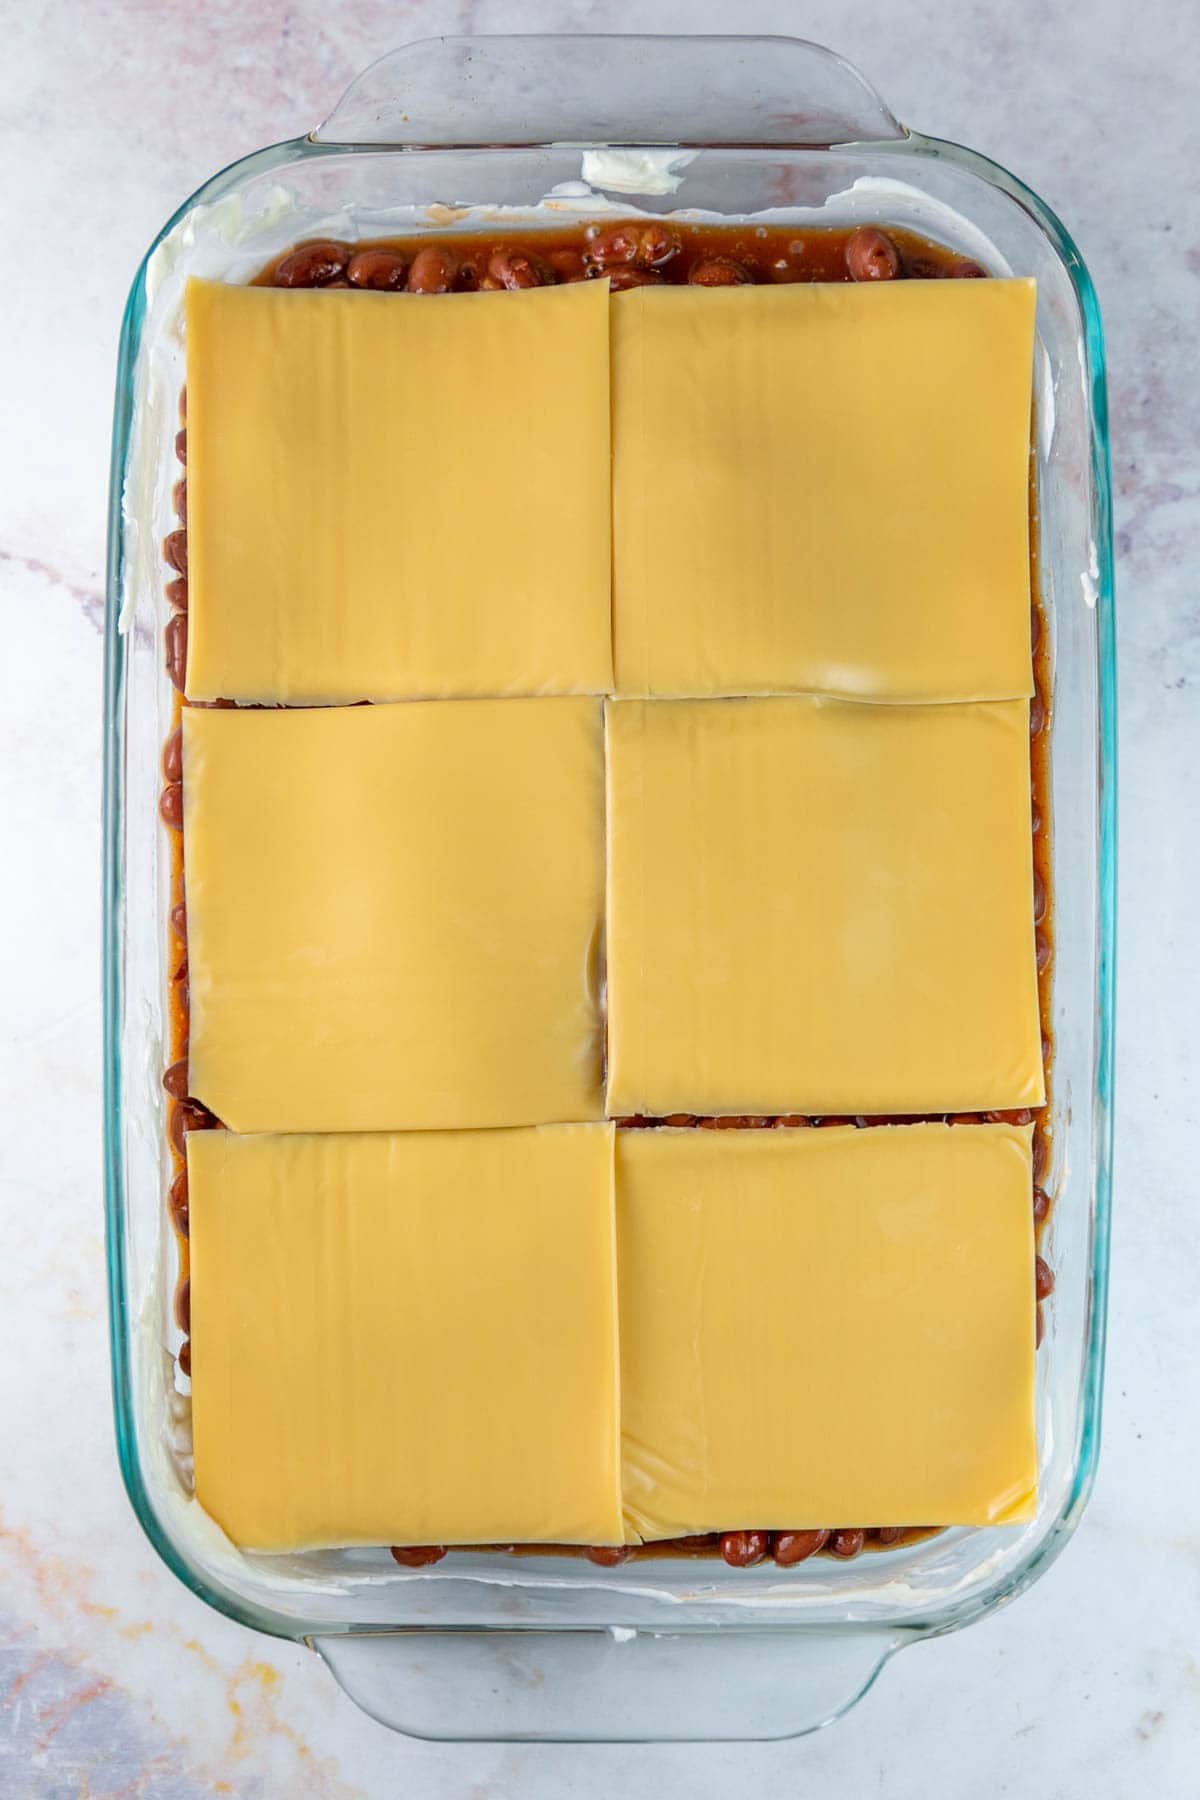 velveeta slices on top of a baking dish filled with beans